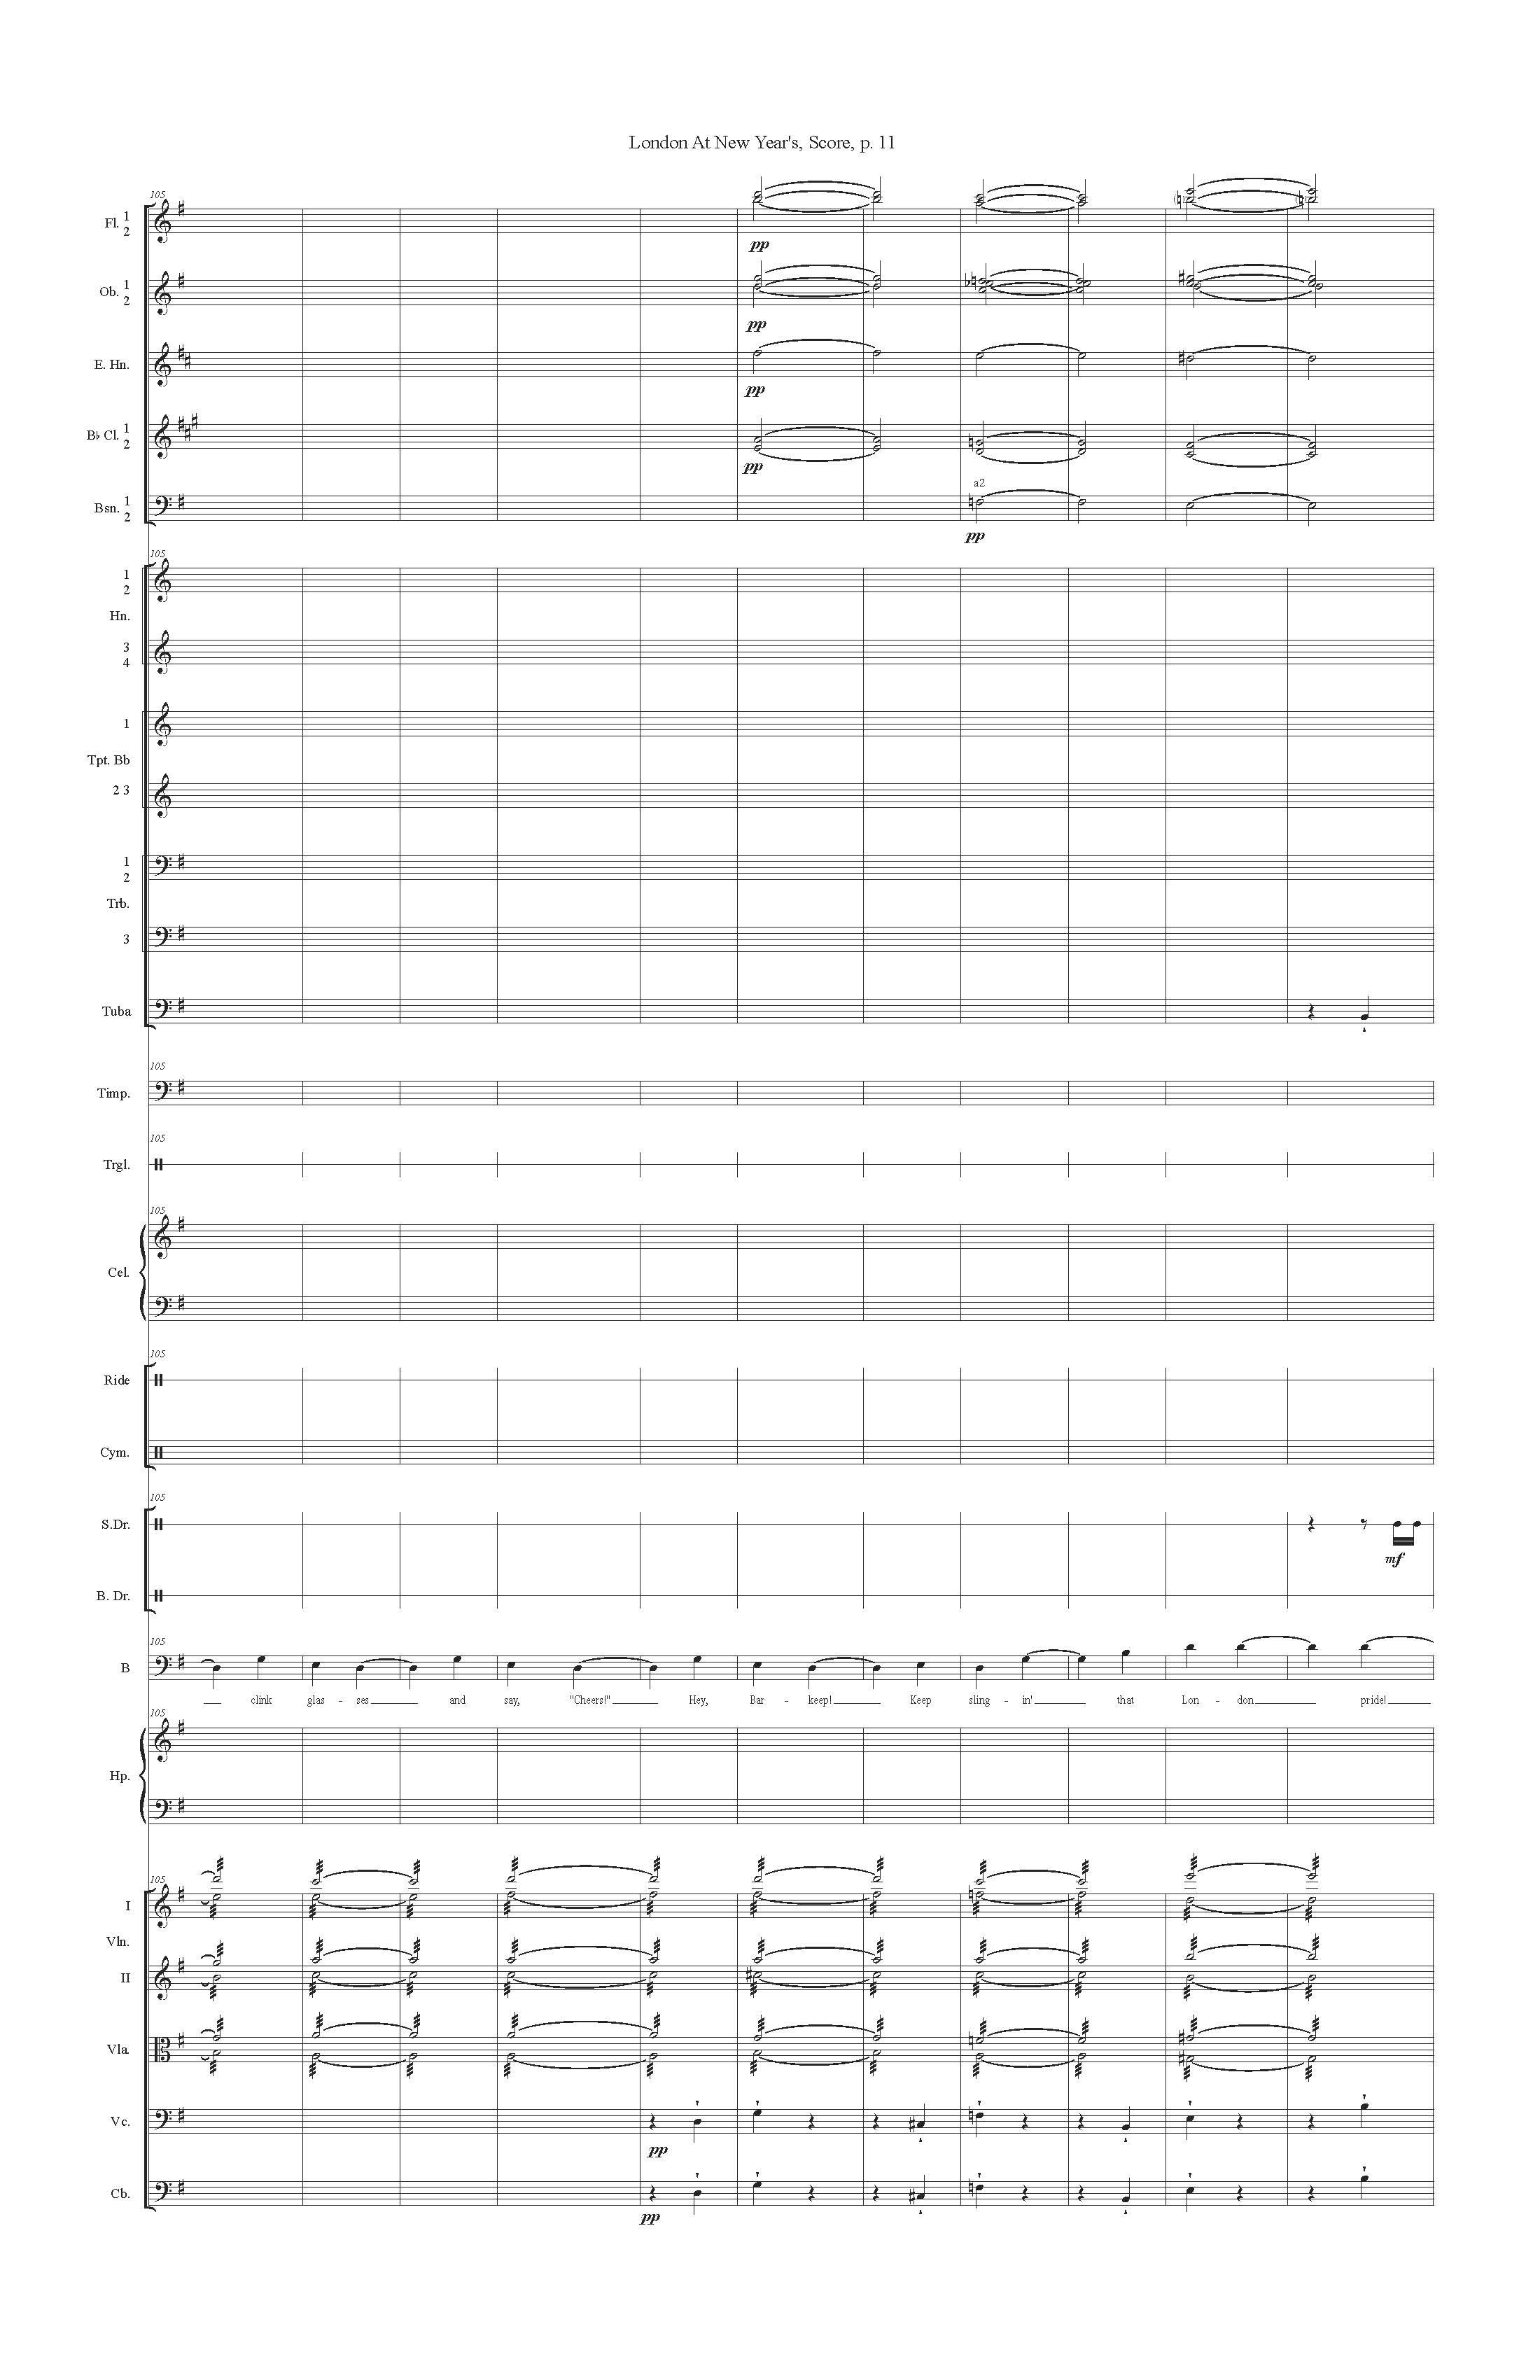 LONDON AT NEW YEARS ORCH - Score_Page_11.jpg